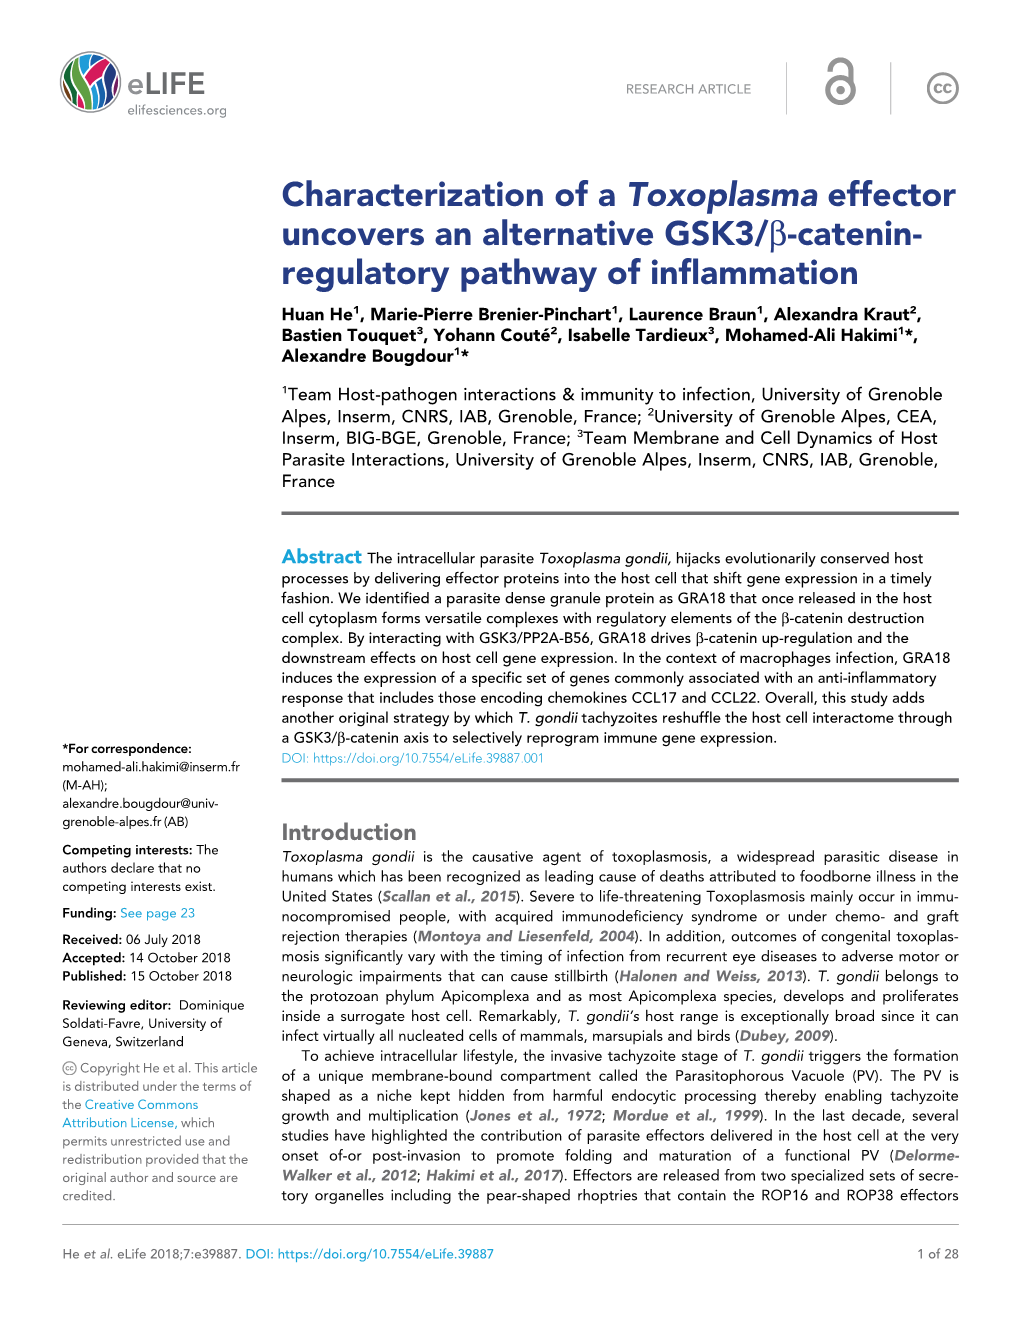 Characterization of a Toxoplasma Effector Uncovers An